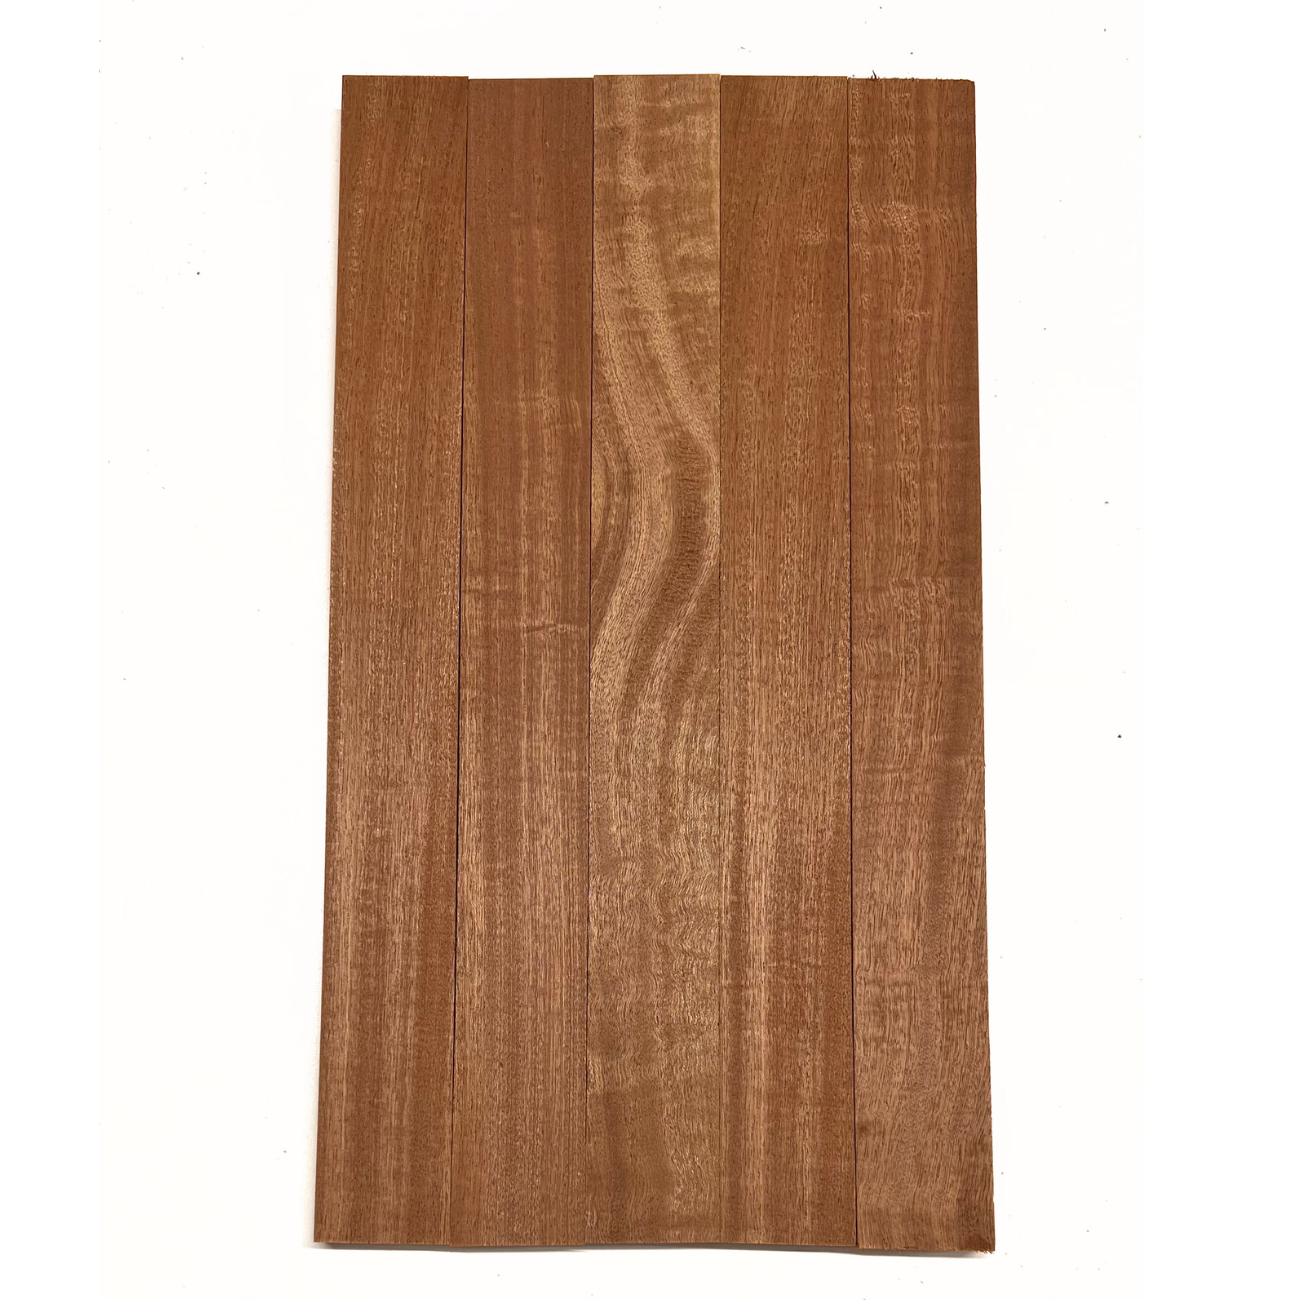 Pack Of 5 ,Quilted Curly Sapele 3/4 Lumber Boards/Cutting Board Blocks - Exotic Wood Zone - Buy online Across USA 